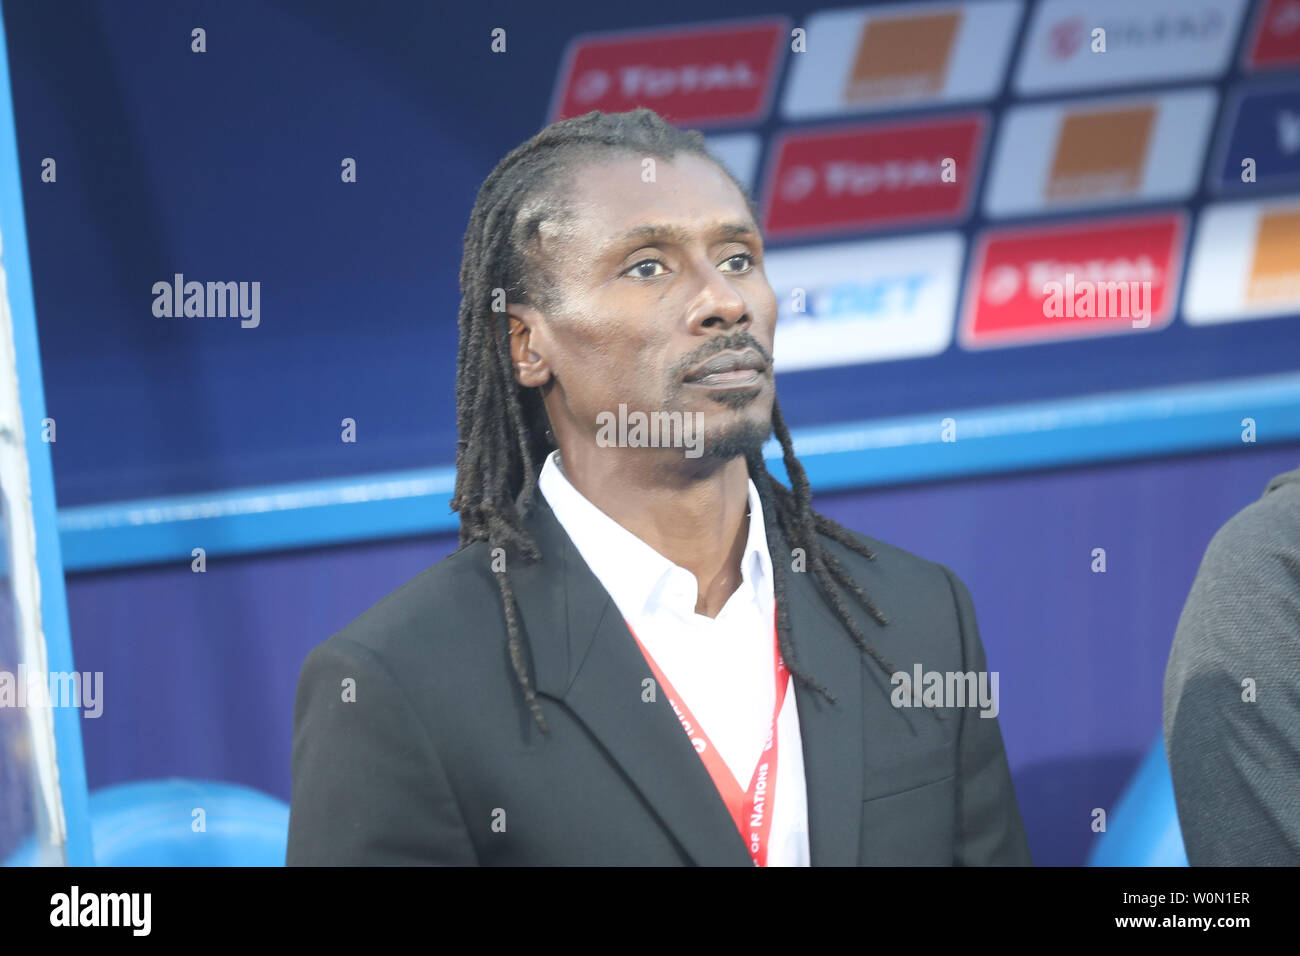 Cairo, Egypt. 27th June, 2019. Senegal manager Aliou Cisse reacts ahead of the 2019 Africa Cup of Nations Group C soccer match between Senegal and Algeria at the 30 June Stadium. Credit: Gehad Hamdy/dpa/Alamy Live News Stock Photo